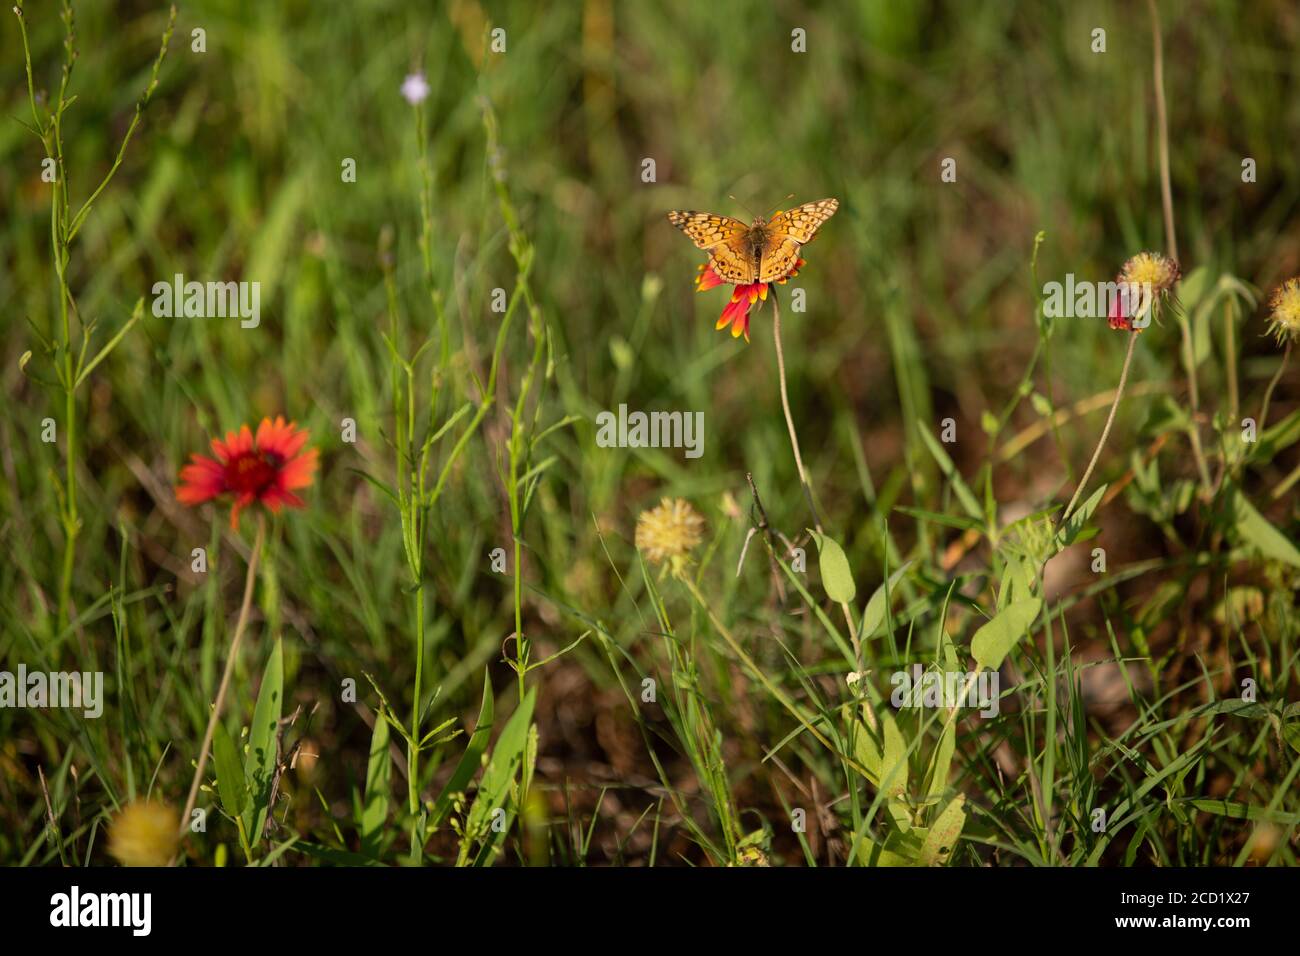 Orange Butterfly on Red Flower Stock Photo